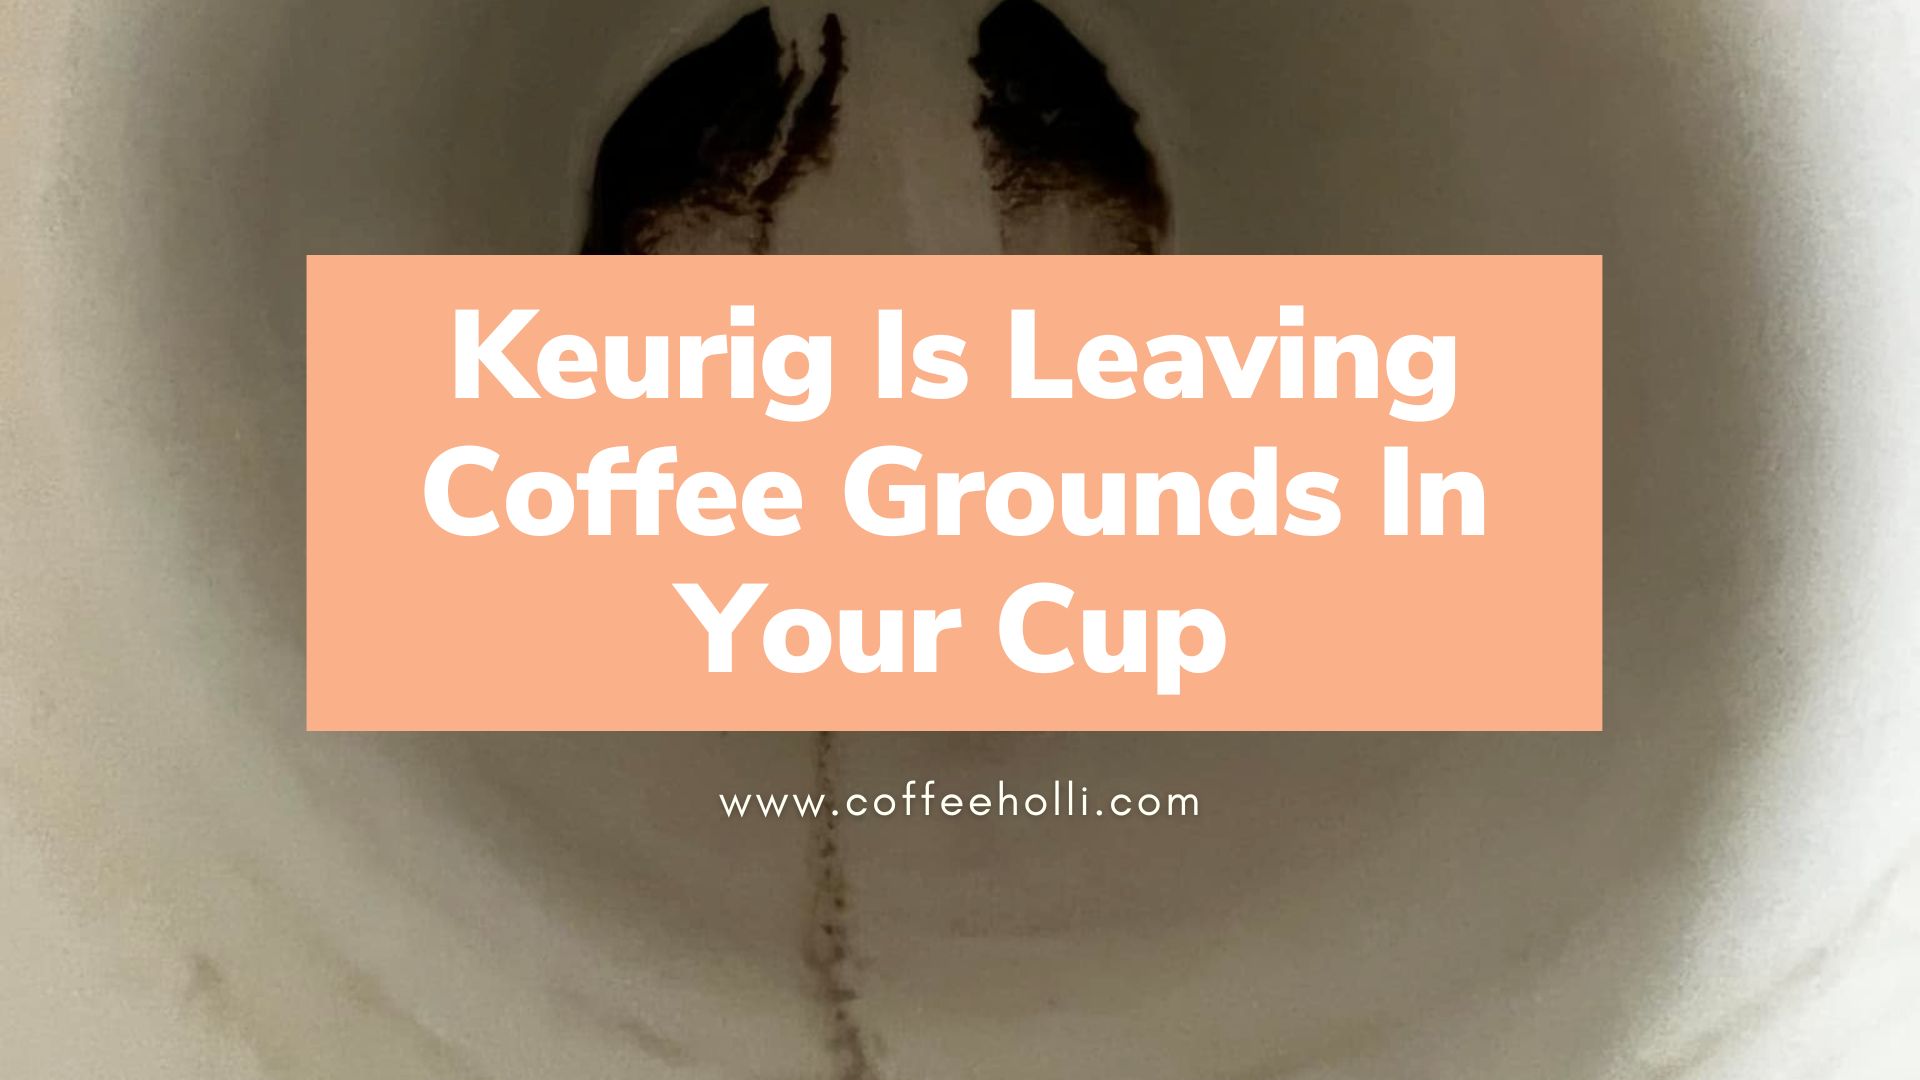 Keurig Leaving Coffee Grounds In Your Cup